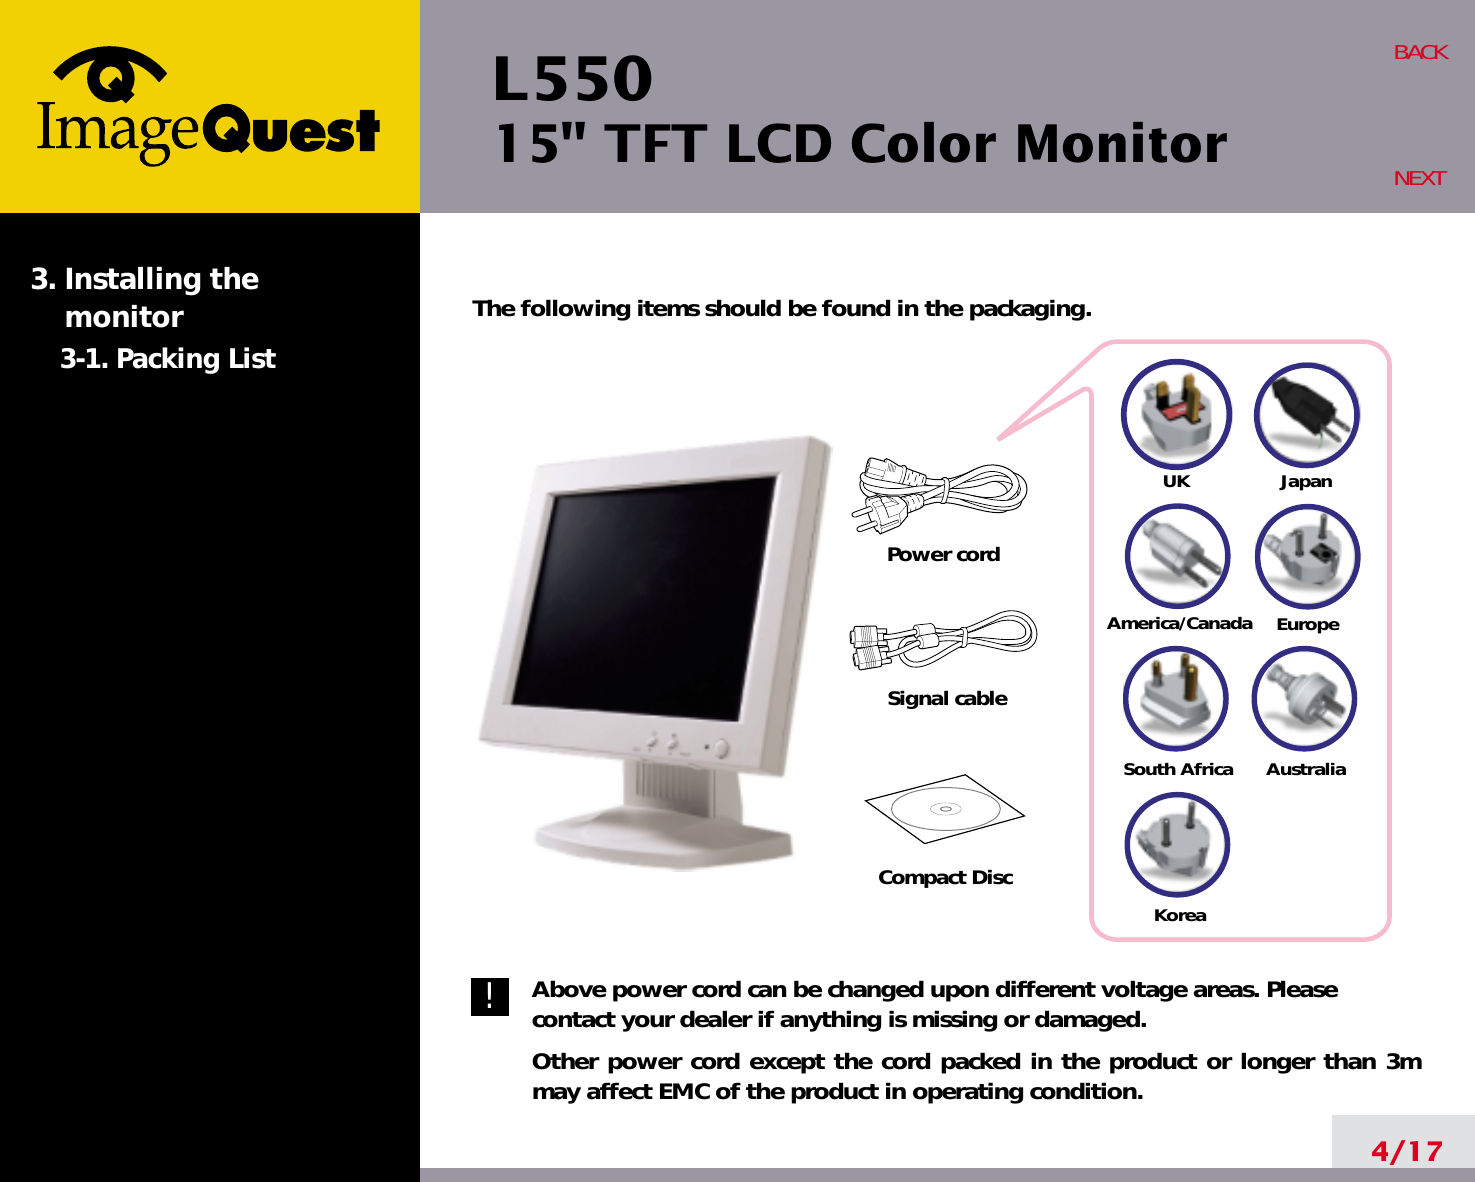 L550 15&quot; TFT LCD Color Monitor4/17BACKNEXTThe following items should be found in the packaging.Above power cord can be changed upon different voltage areas. Pleasecontact your dealer if anything is missing or damaged.Other power cord except the cord packed in the product or longer than 3mmay affect EMC of the product in operating condition.3. Installing the monitor3-1. Packing List!UKAmerica/CanadaJapanAustraliaKoreaEuropeSouth AfricaPower cordSignal cableCompact Disc